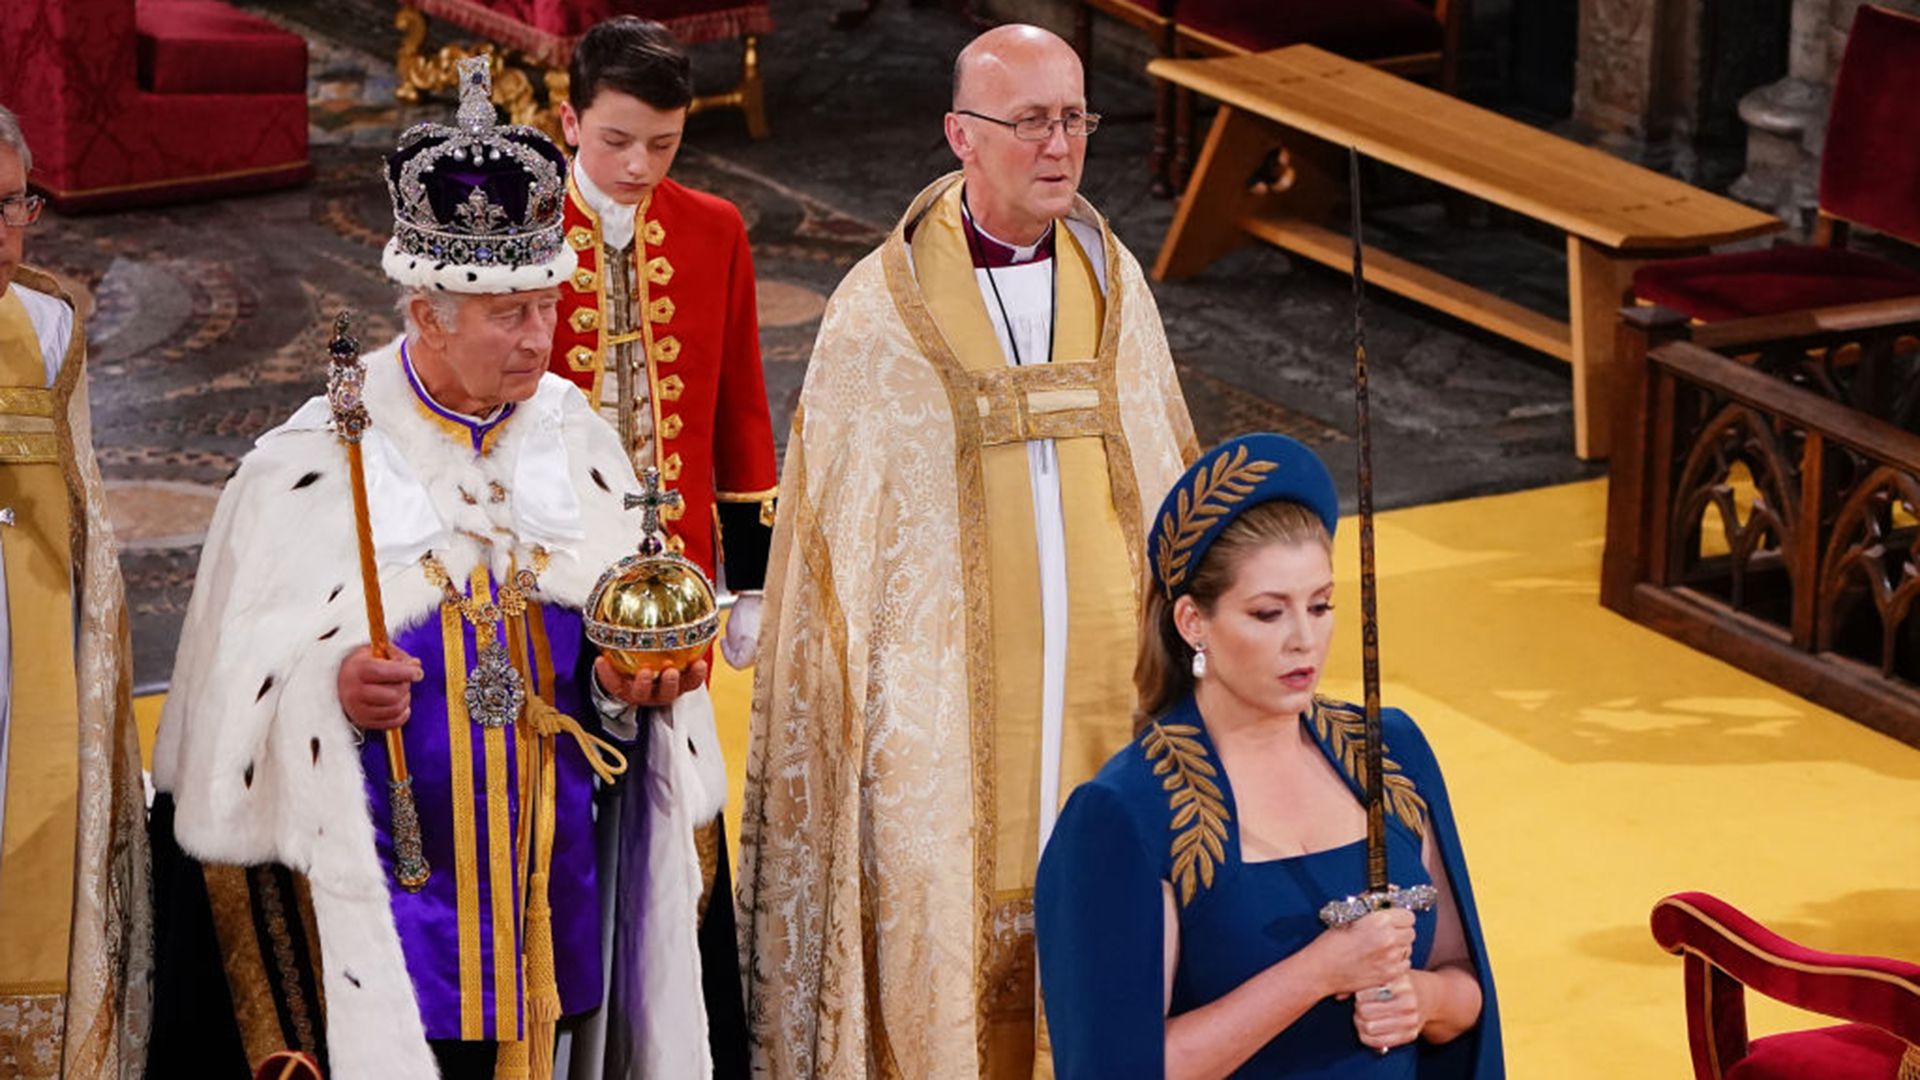 Penny Mordaunt holding the Jewelled Sword of Offering as she walks in front of King Charles